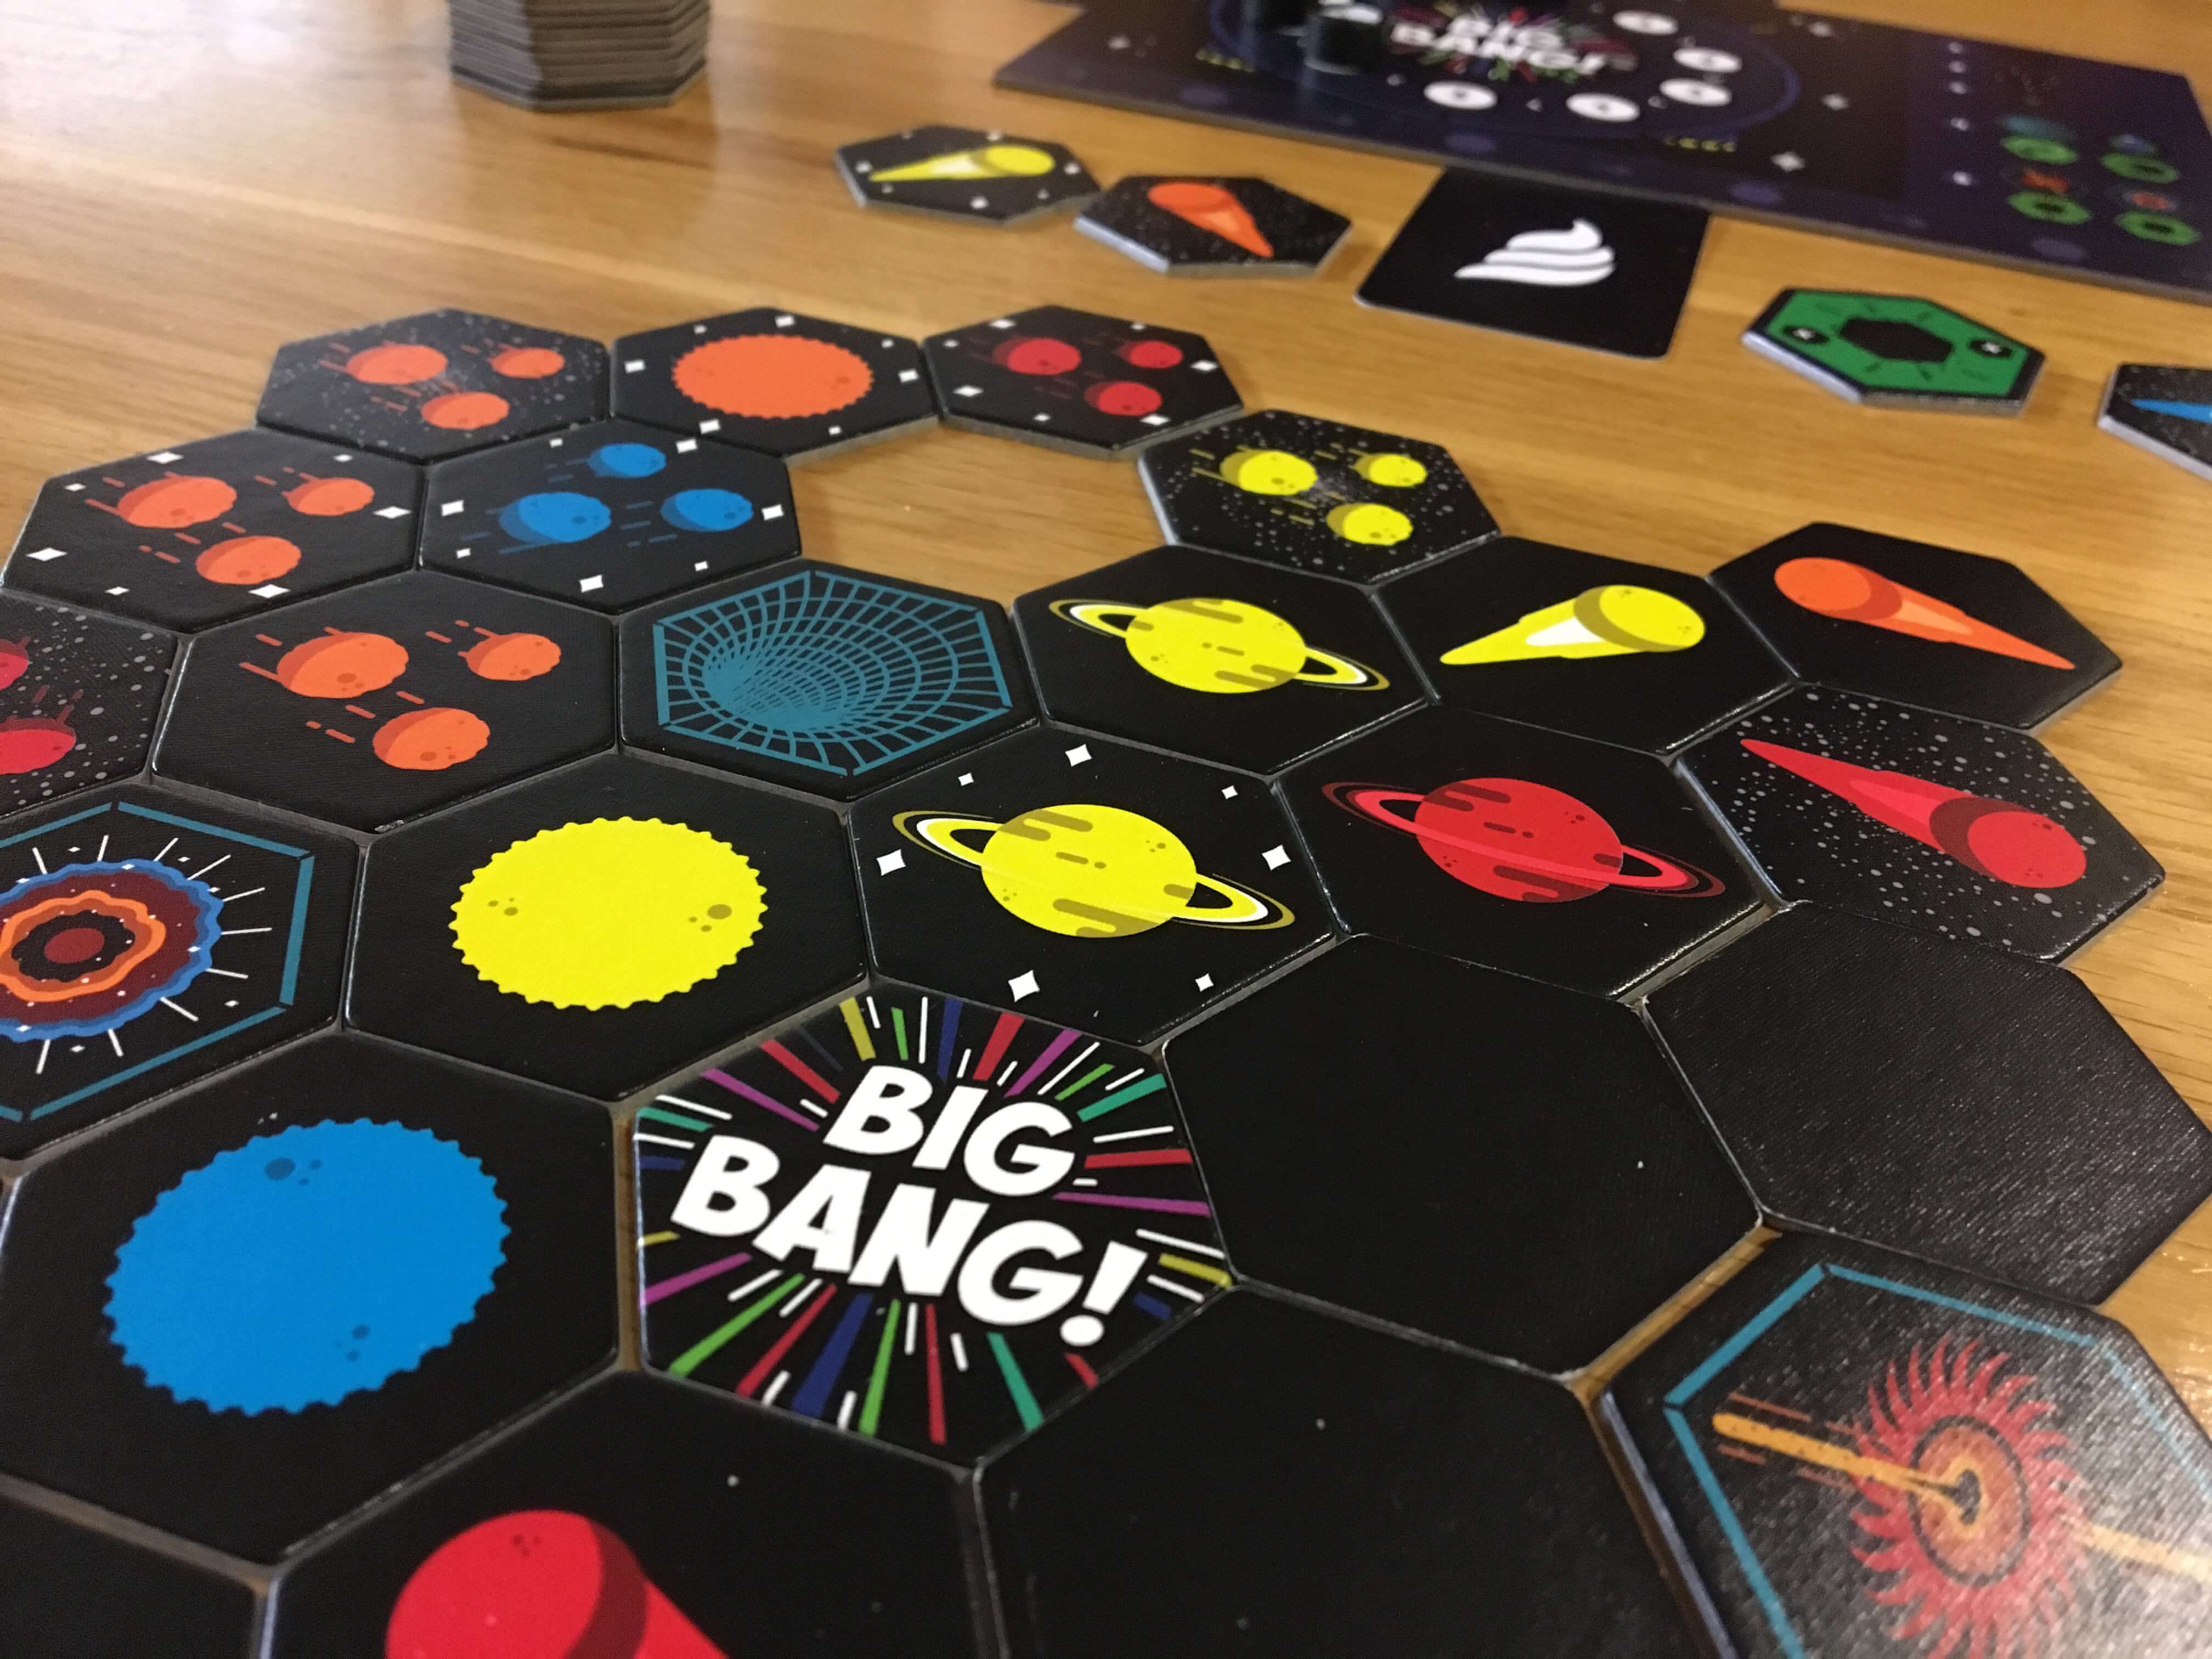 Big Bang 13.7 review — Explosively exciting – Big Boss Battle (B3)